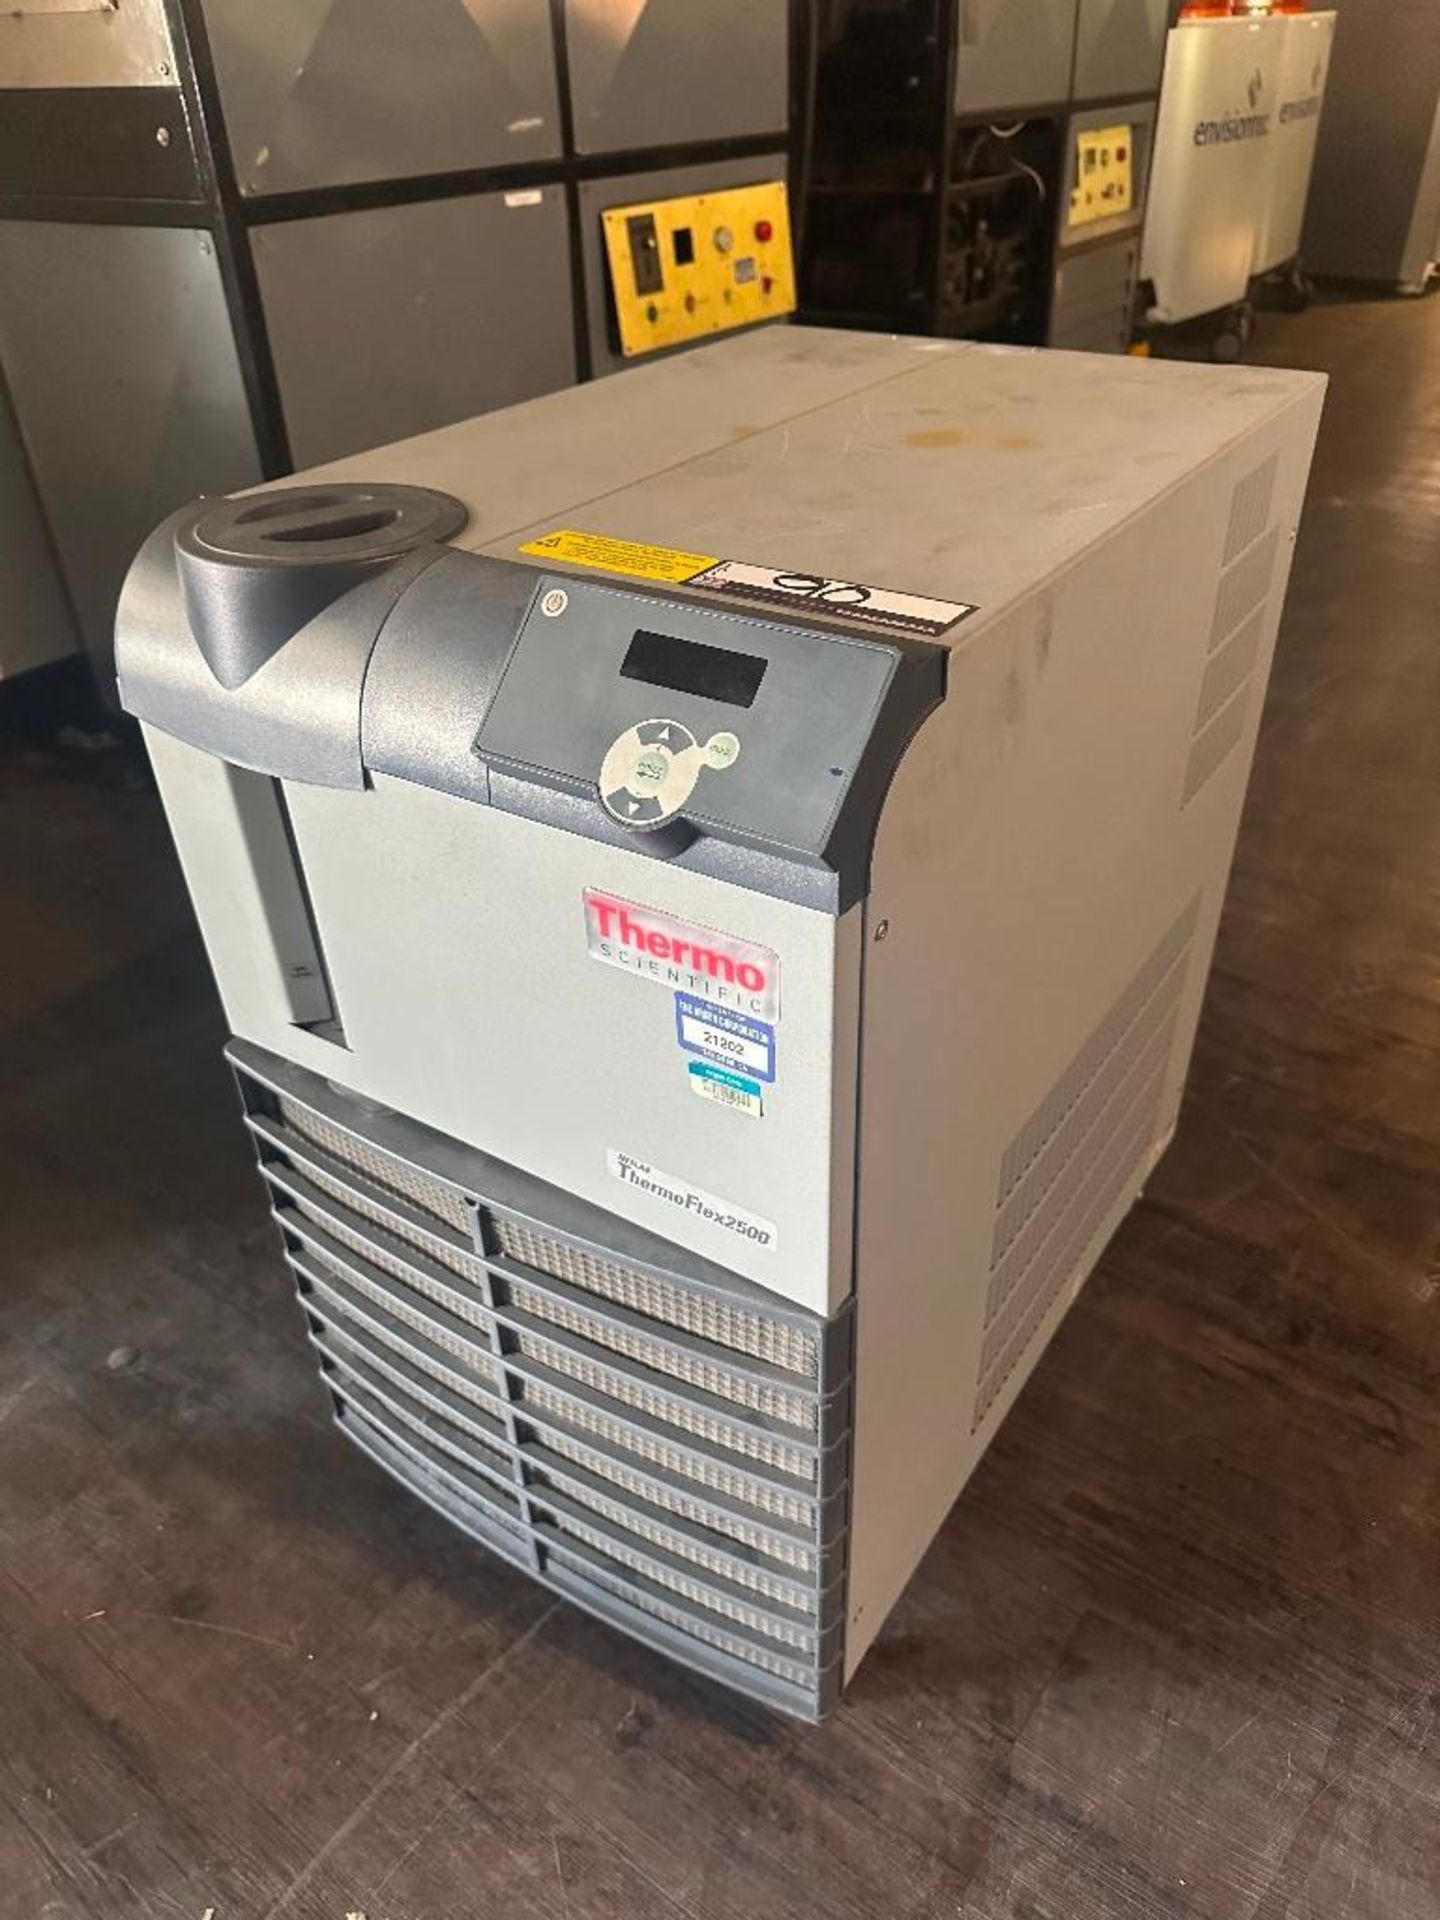 Thermo Scientific Neslab Thermoflex 2500 Recirculating Chiller, s/n 1111976501180226 - Image 2 of 5